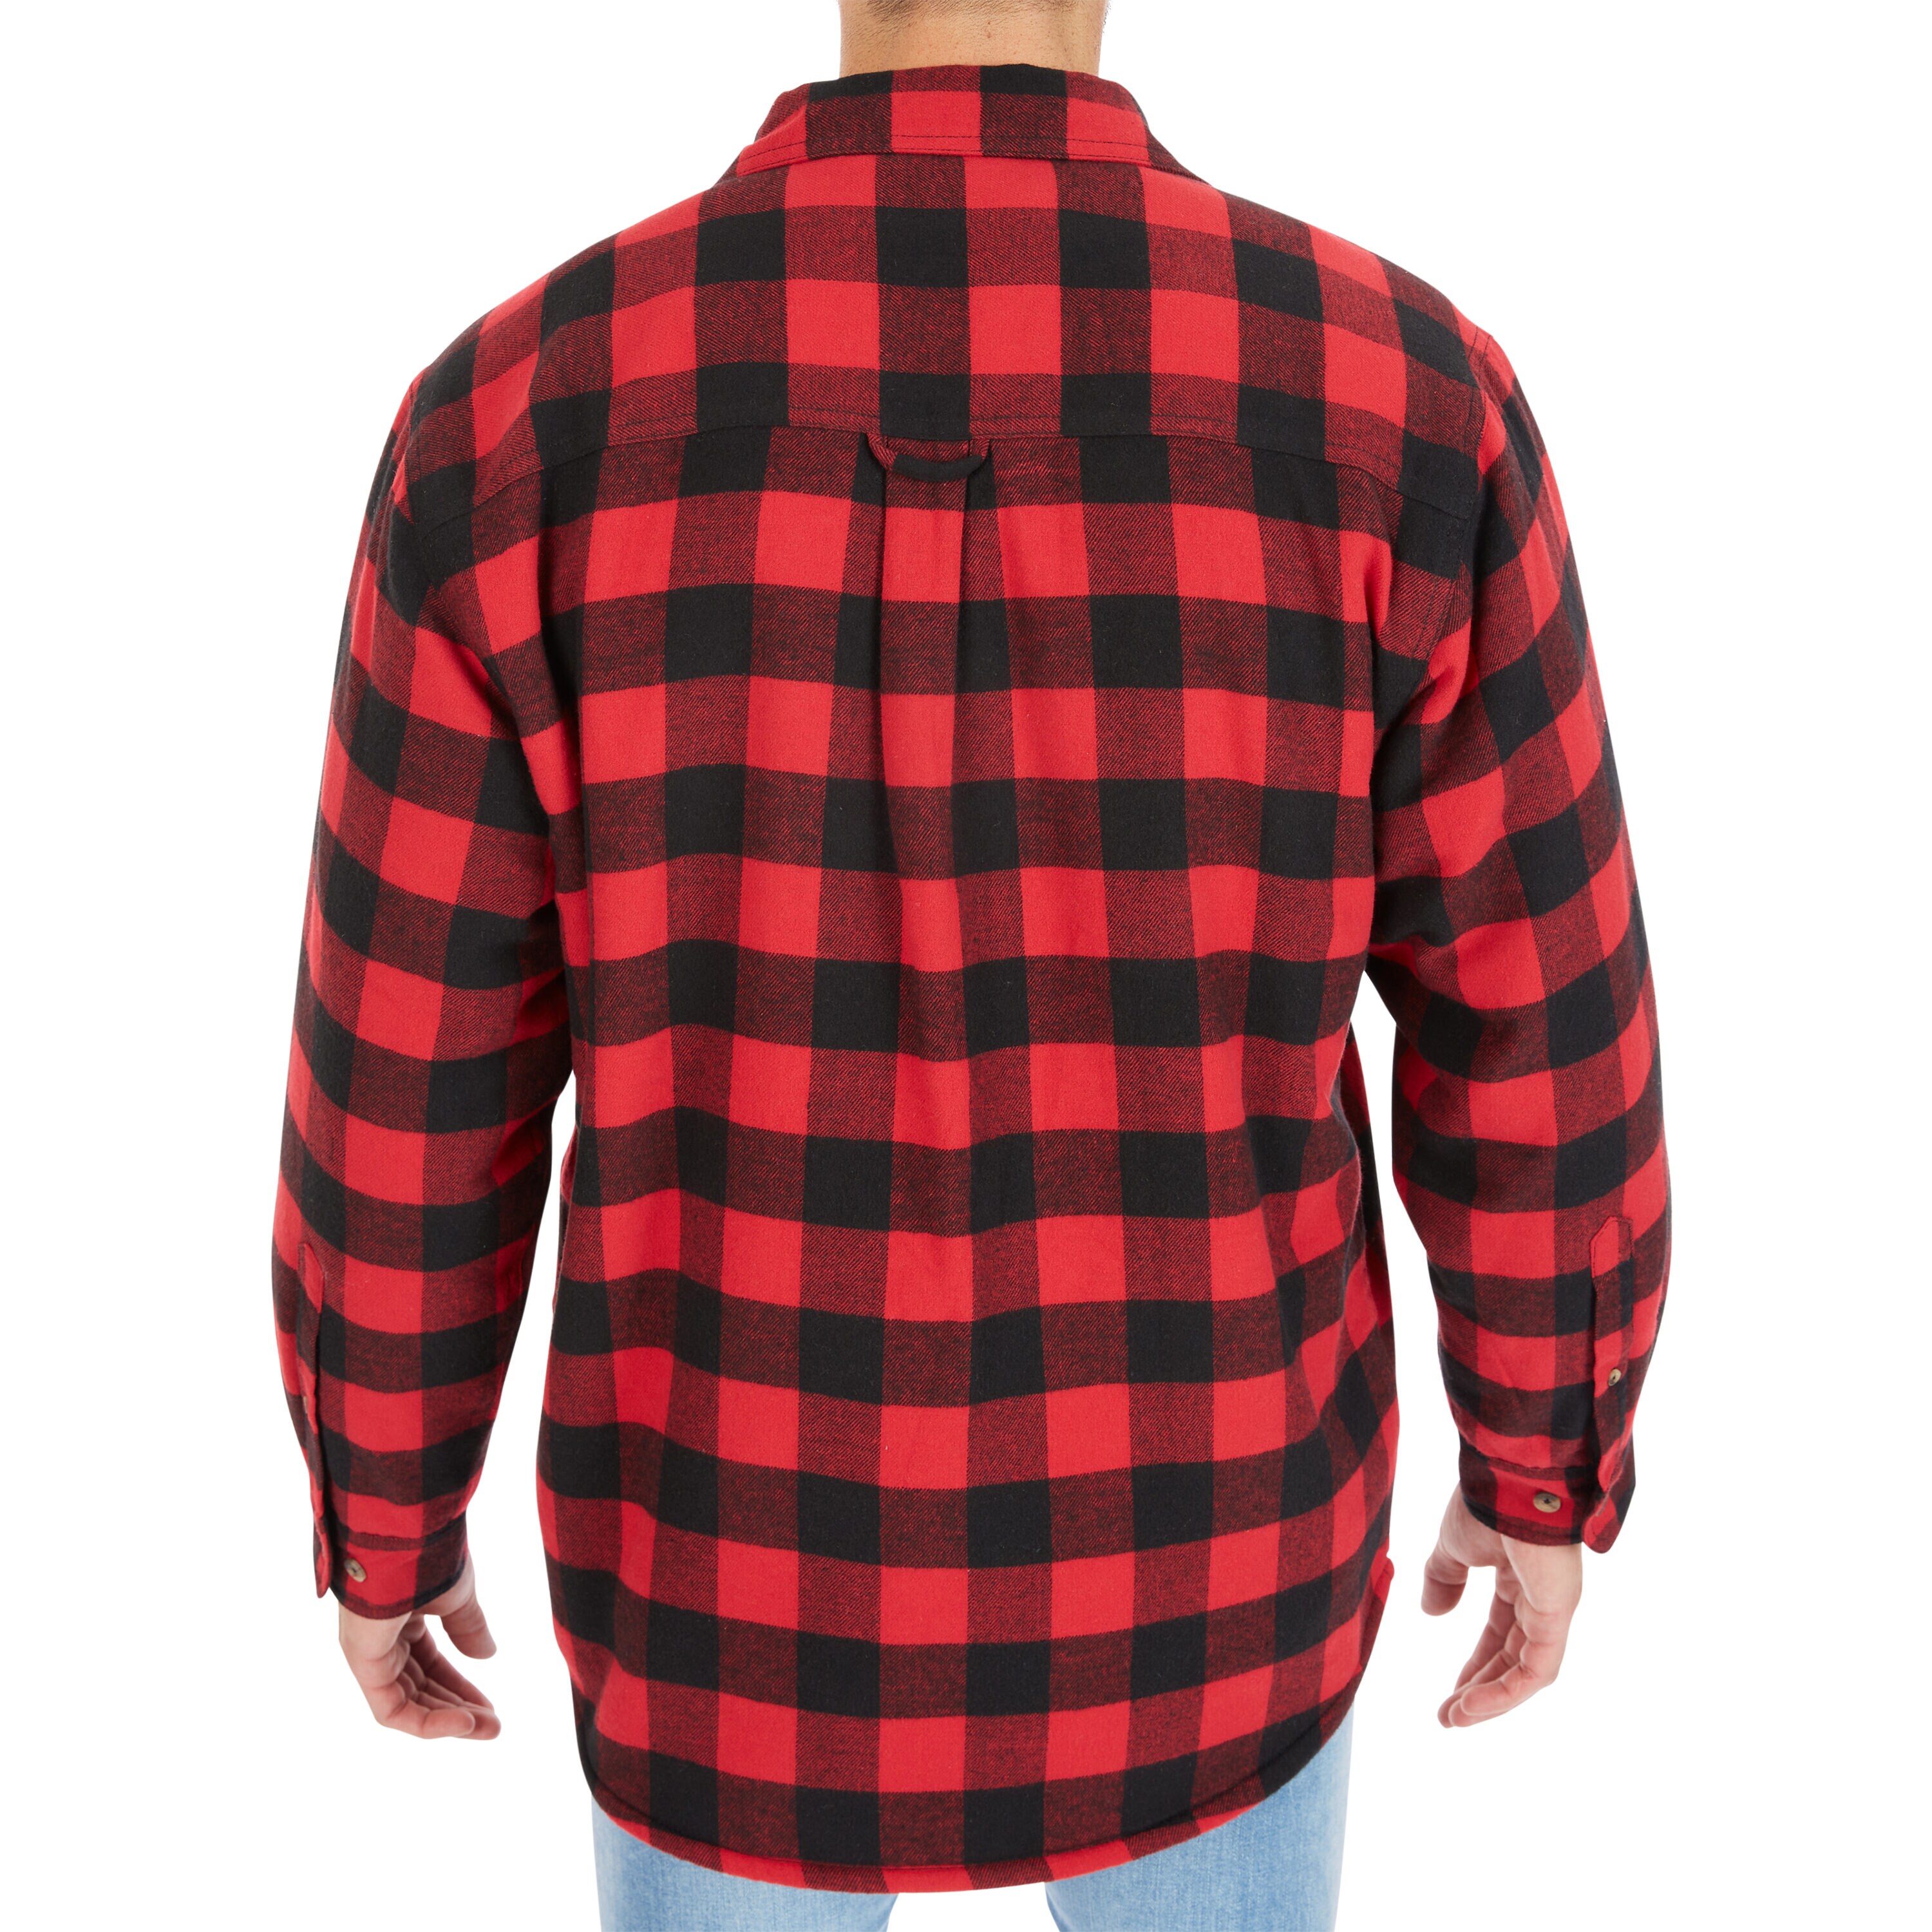 Smith's Workwear Zip-Front Sherpa-Lined Flannel Shirt Jacket in